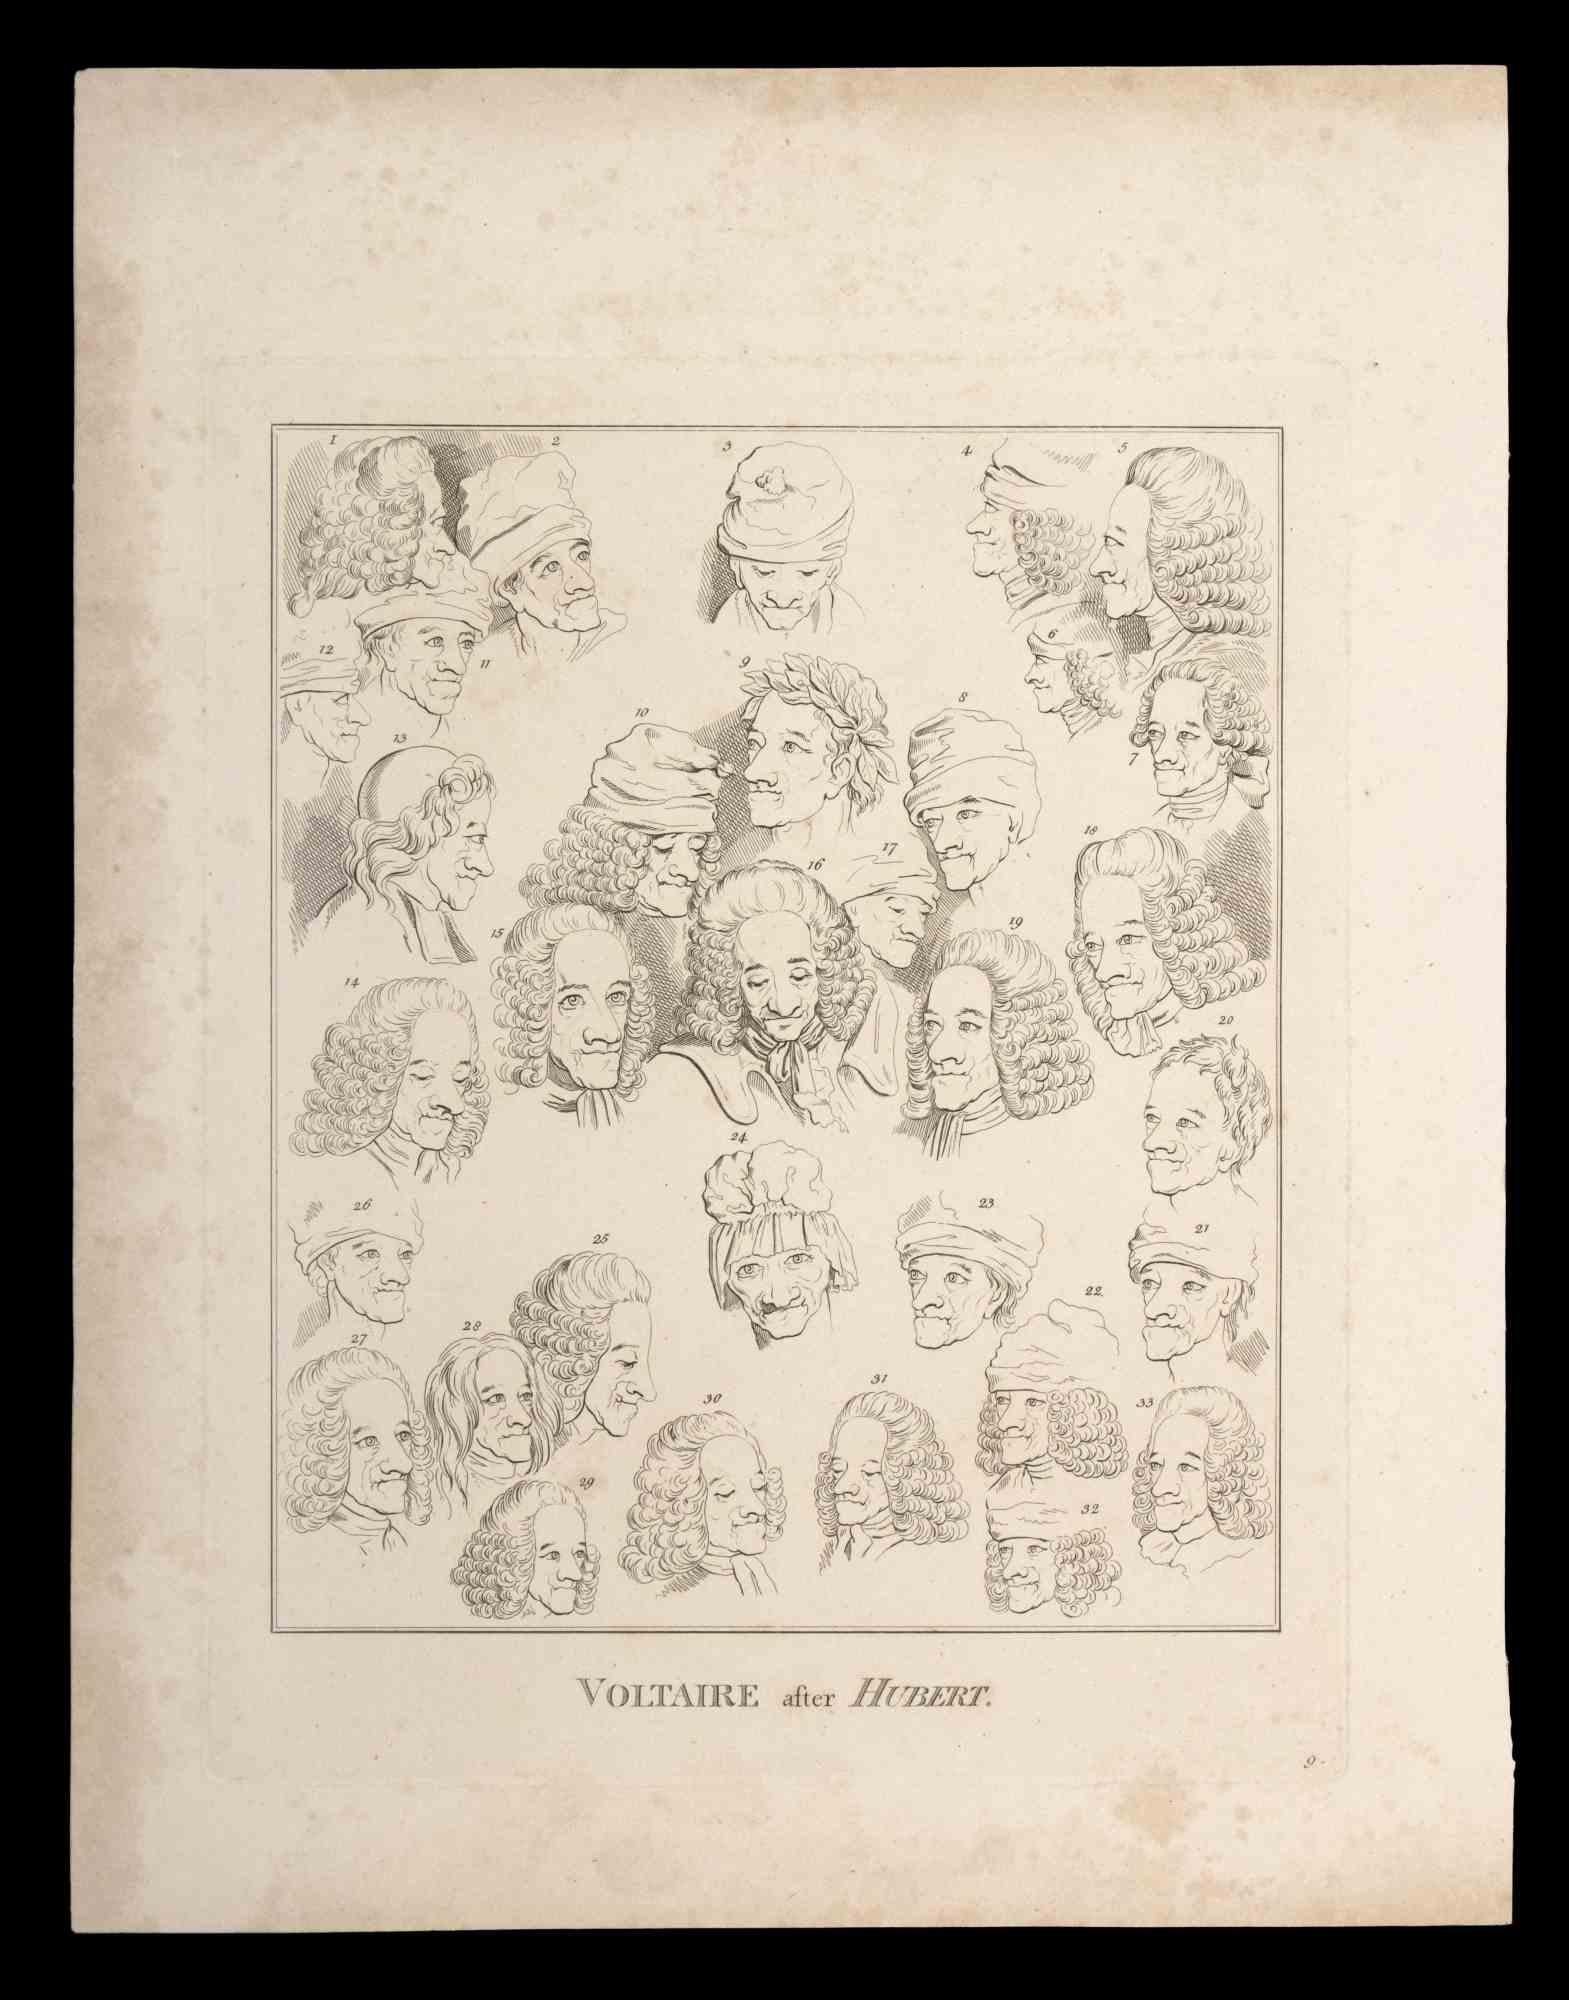 Voltaire after Hubert is an original etching artwork realized by Thomas Holloway for Johann Caspar Lavater's "Essays on Physiognomy, Designed to Promote the Knowledge and the Love of Mankind", London, Bensley, 1810. 

Titled on the lower